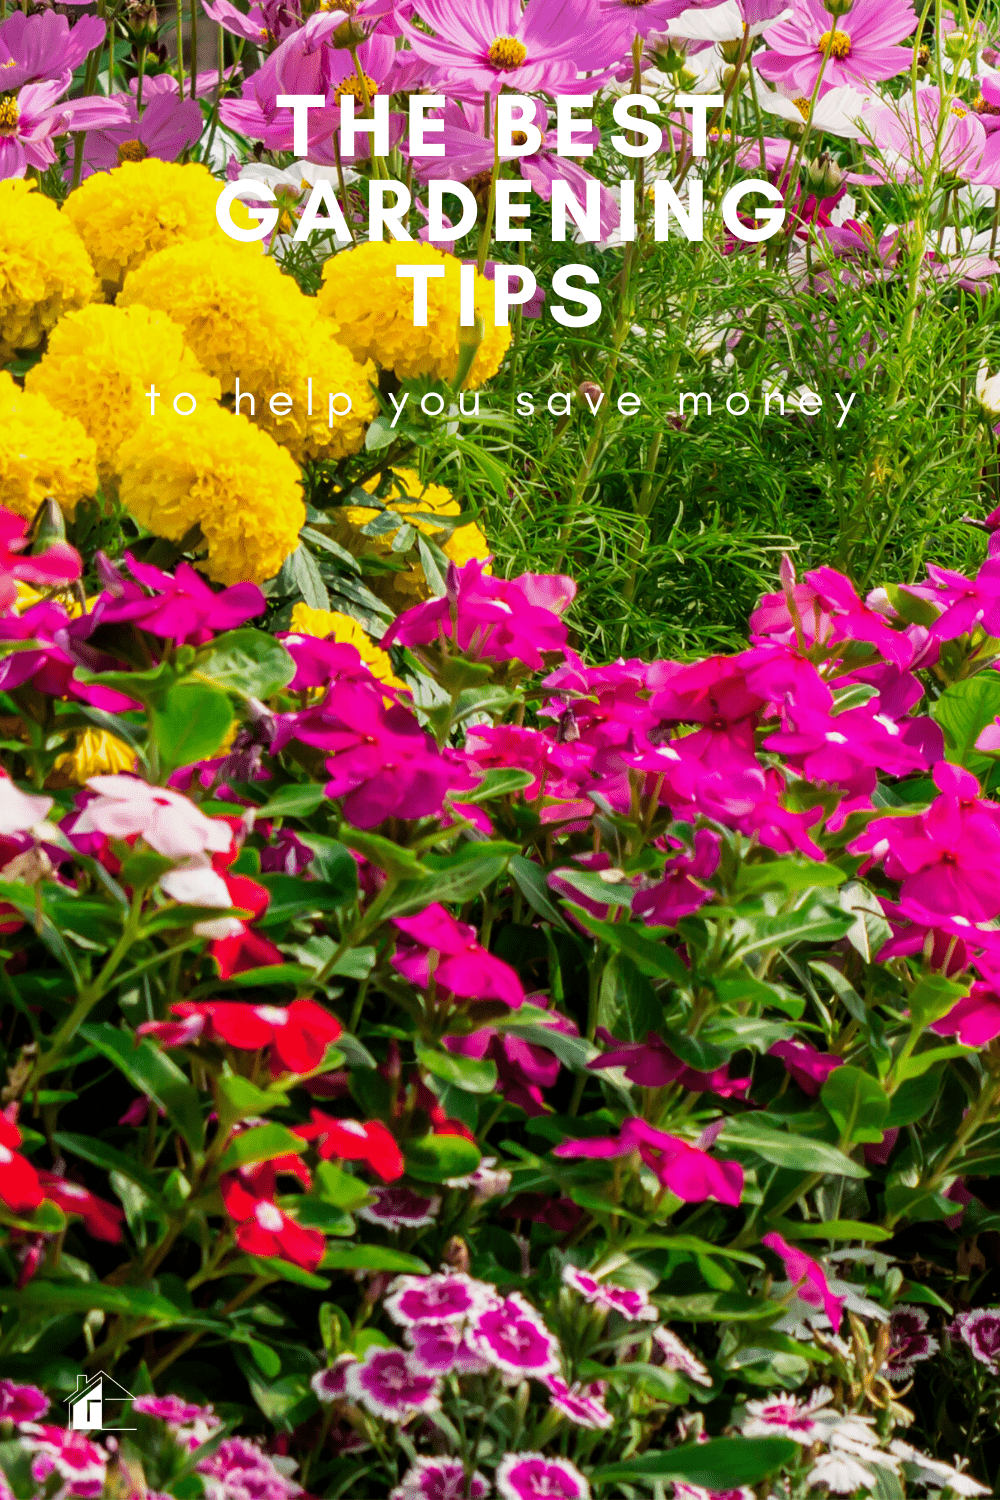 Are you overspending money on your gardening this season? Learn five gardening tips to save money this season and future seasons. #Gardening #gardeningtips #savemoney #moneysavingtips via @mystayathome